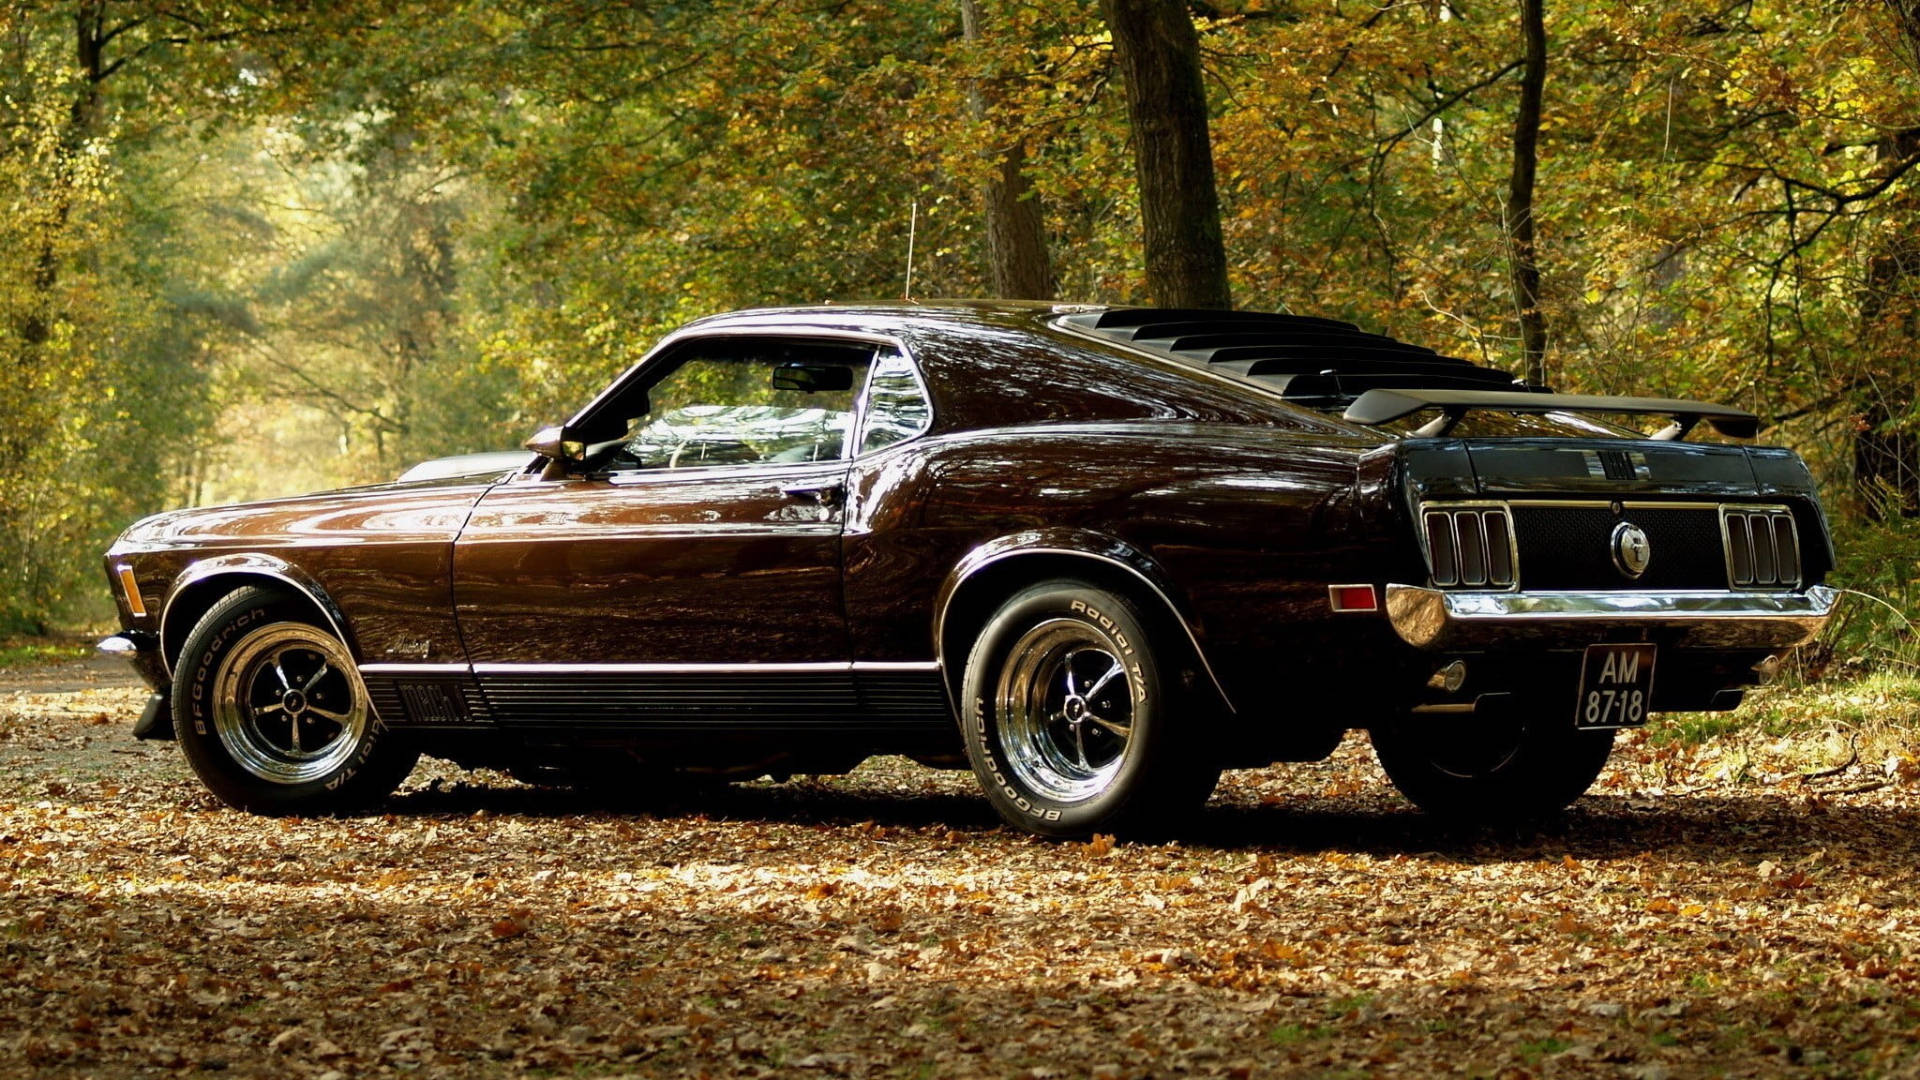 Ford Mustang Hd In The Woods Wallpaper